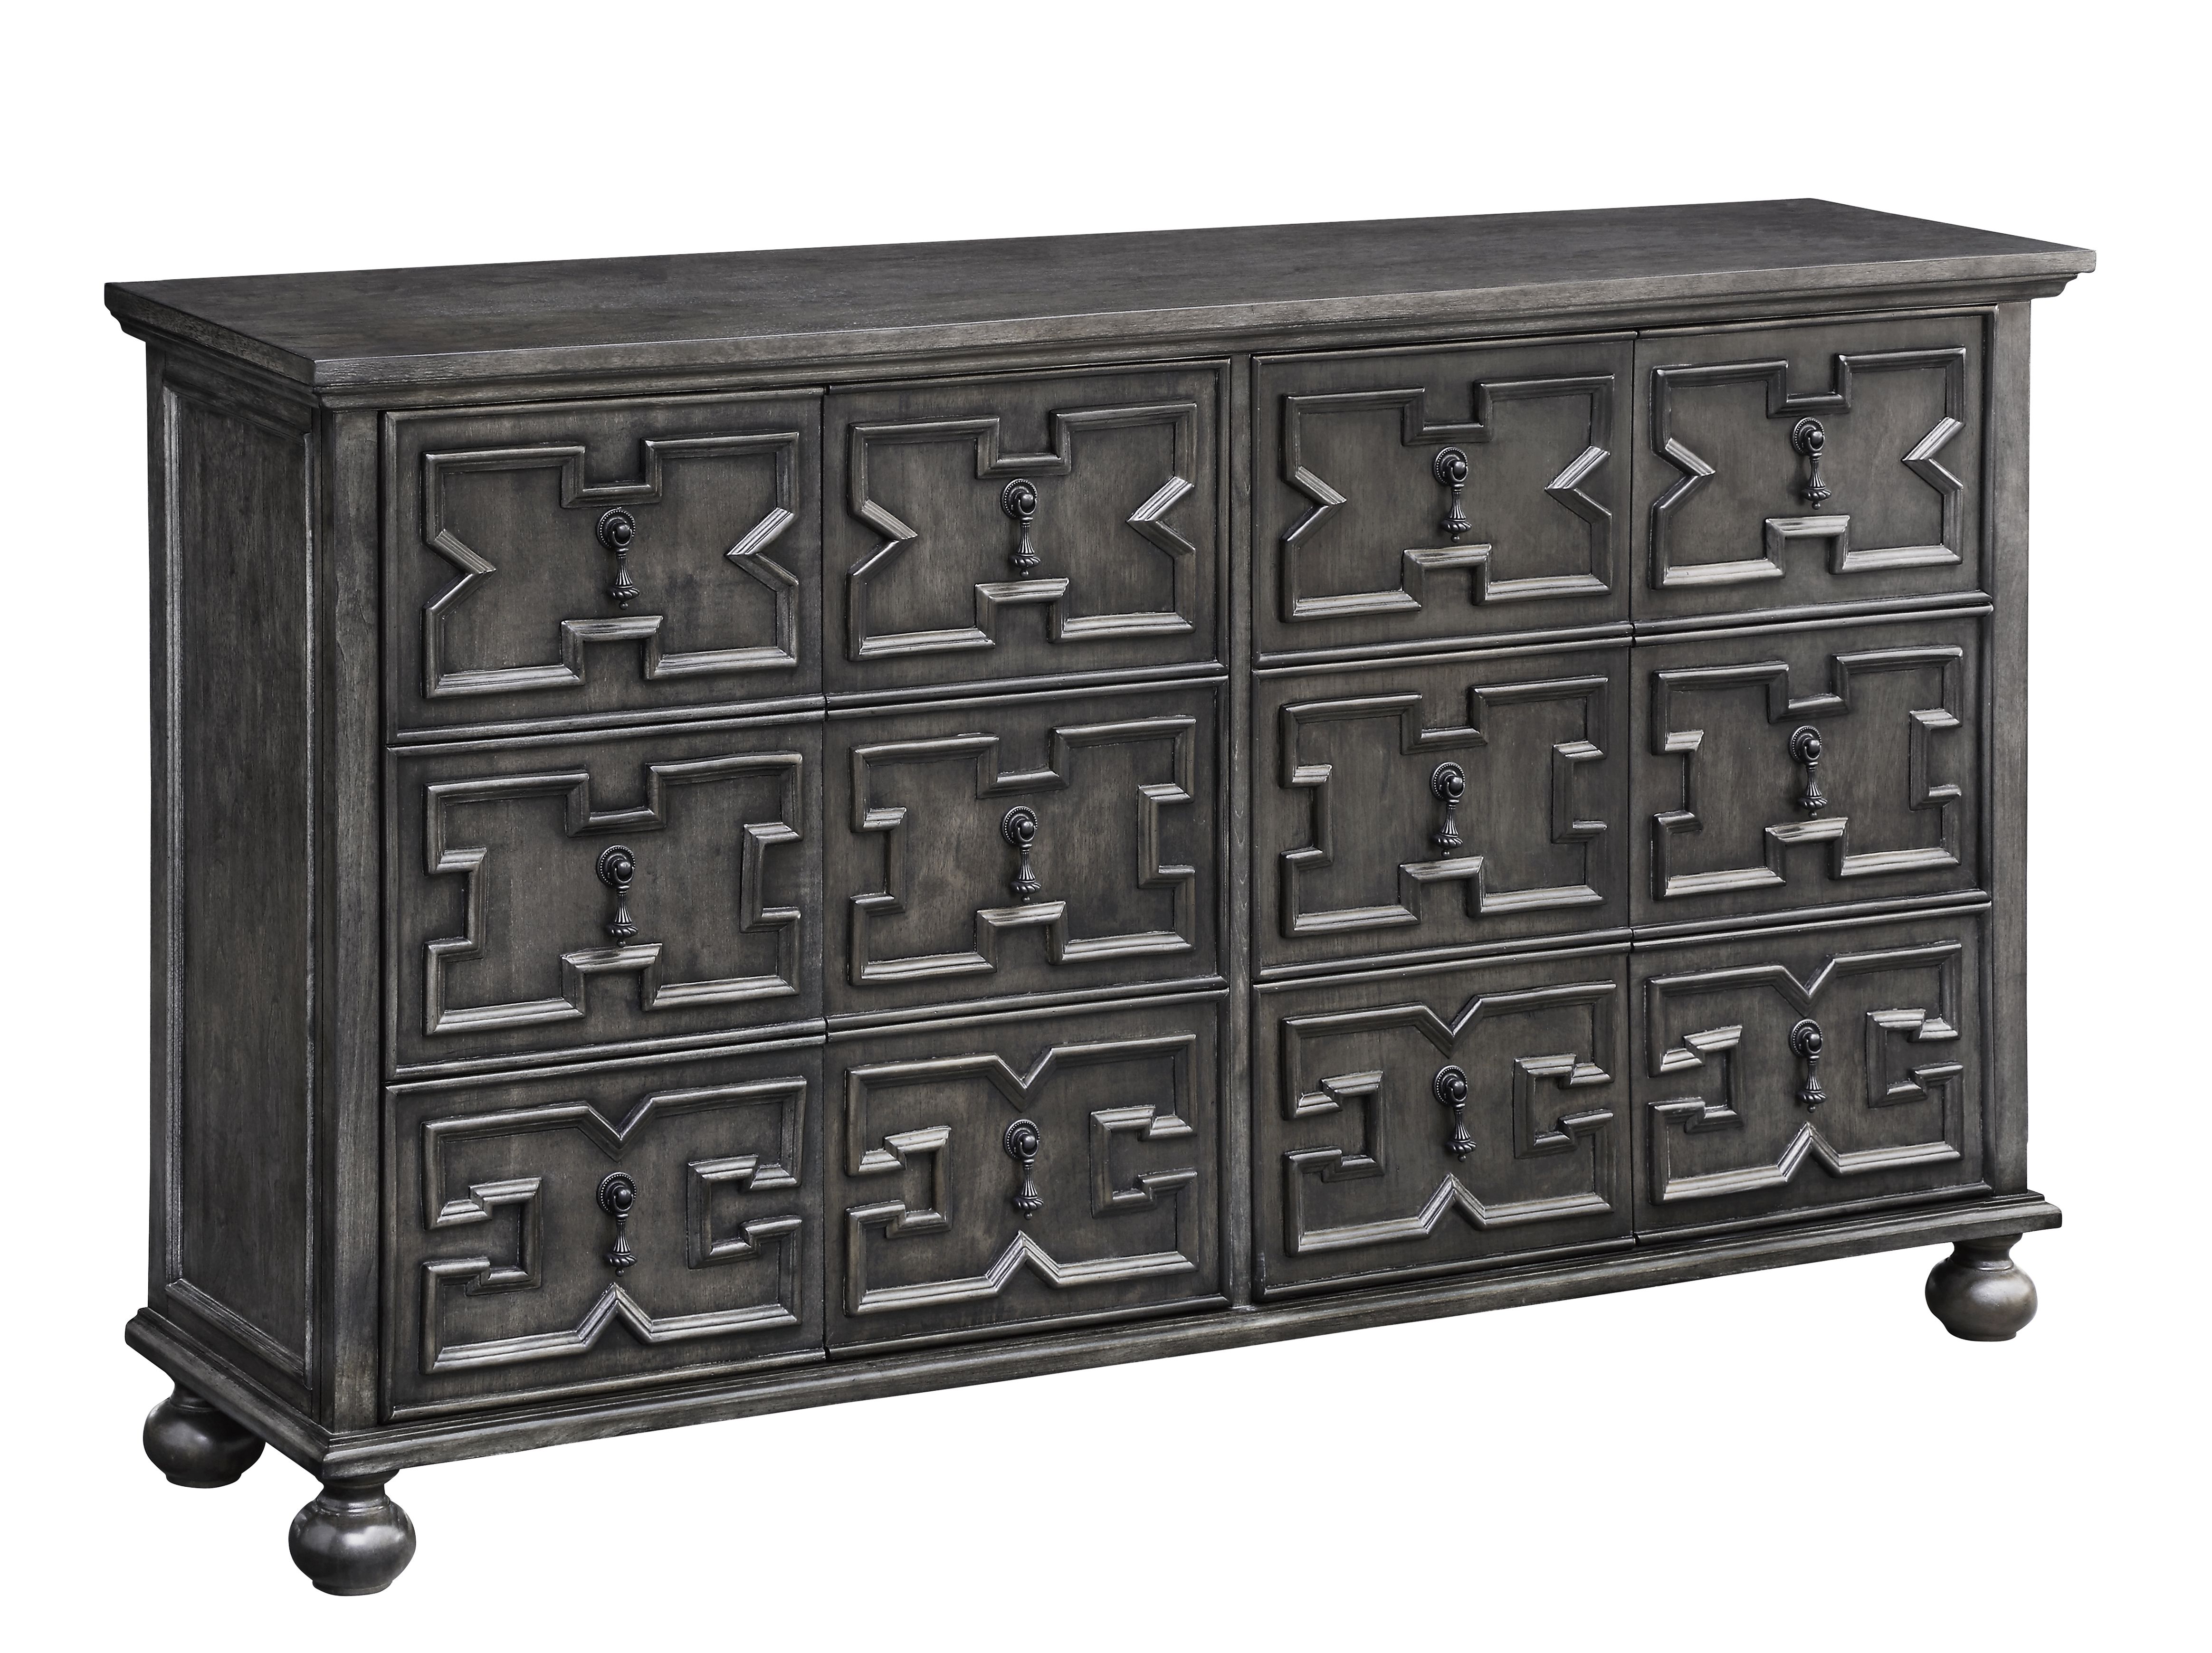 Rutledge Antique Grey 4 Door Pattern Front Sideboard Intended For Rutledge Sideboards (View 5 of 20)